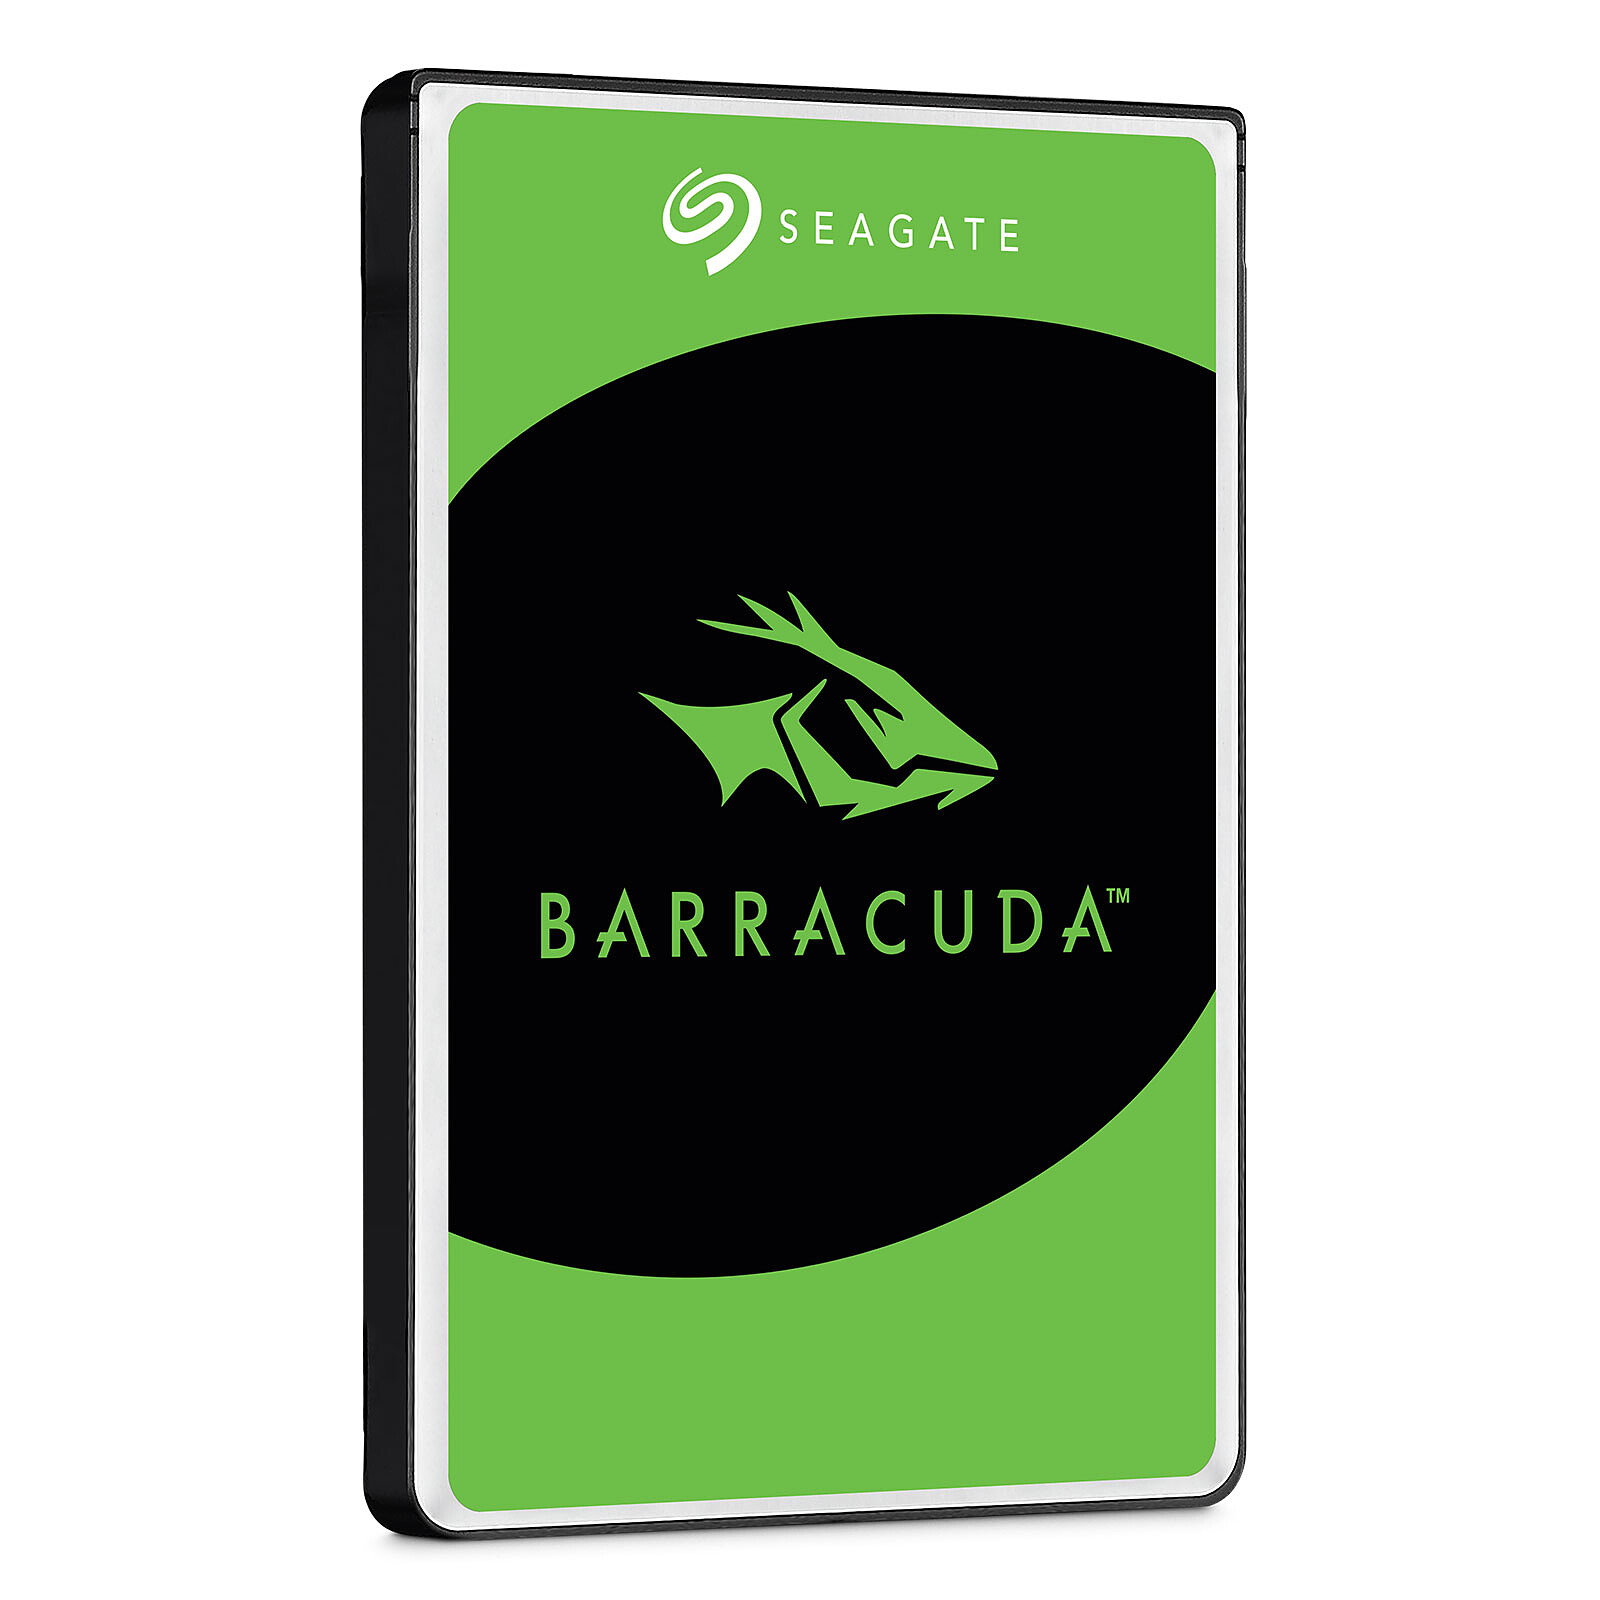 Disque dur Seagate Basic 4 To, Format 2.5